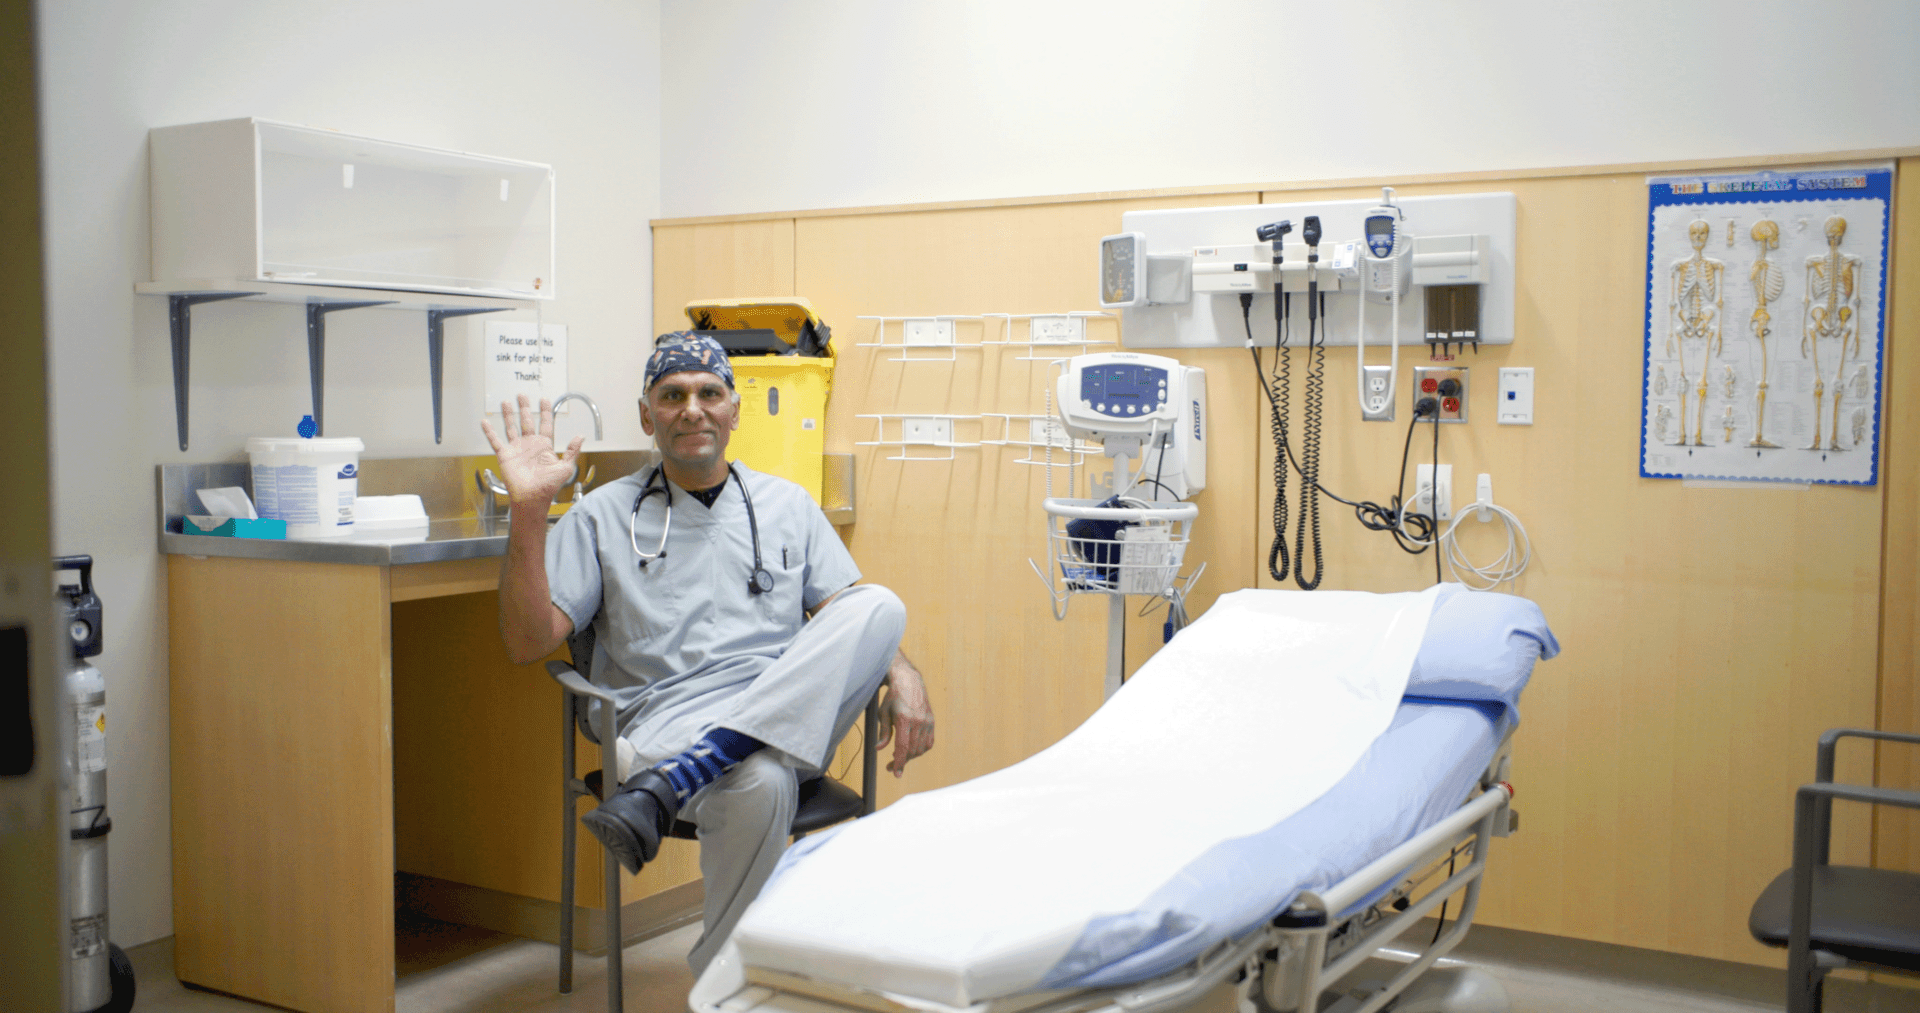 Dr. Kuldeep Sidhu in an exam room at the west end urgent care centre